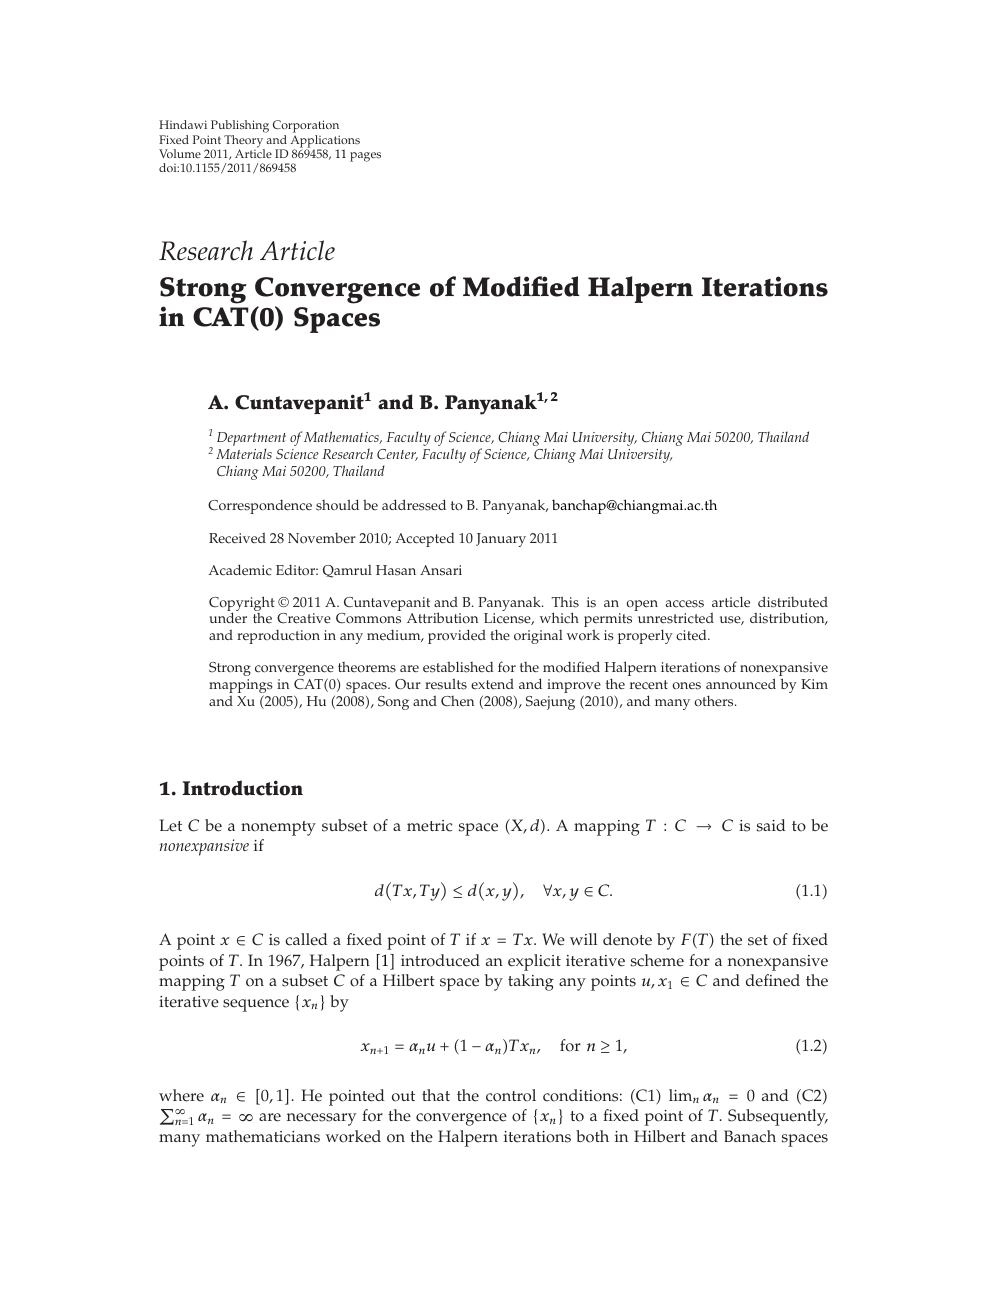 Strong Convergence Of Modified Halpern Iterations In Cat 0 Spaces Topic Of Research Paper In Mathematics Download Scholarly Article Pdf And Read For Free On Cyberleninka Open Science Hub